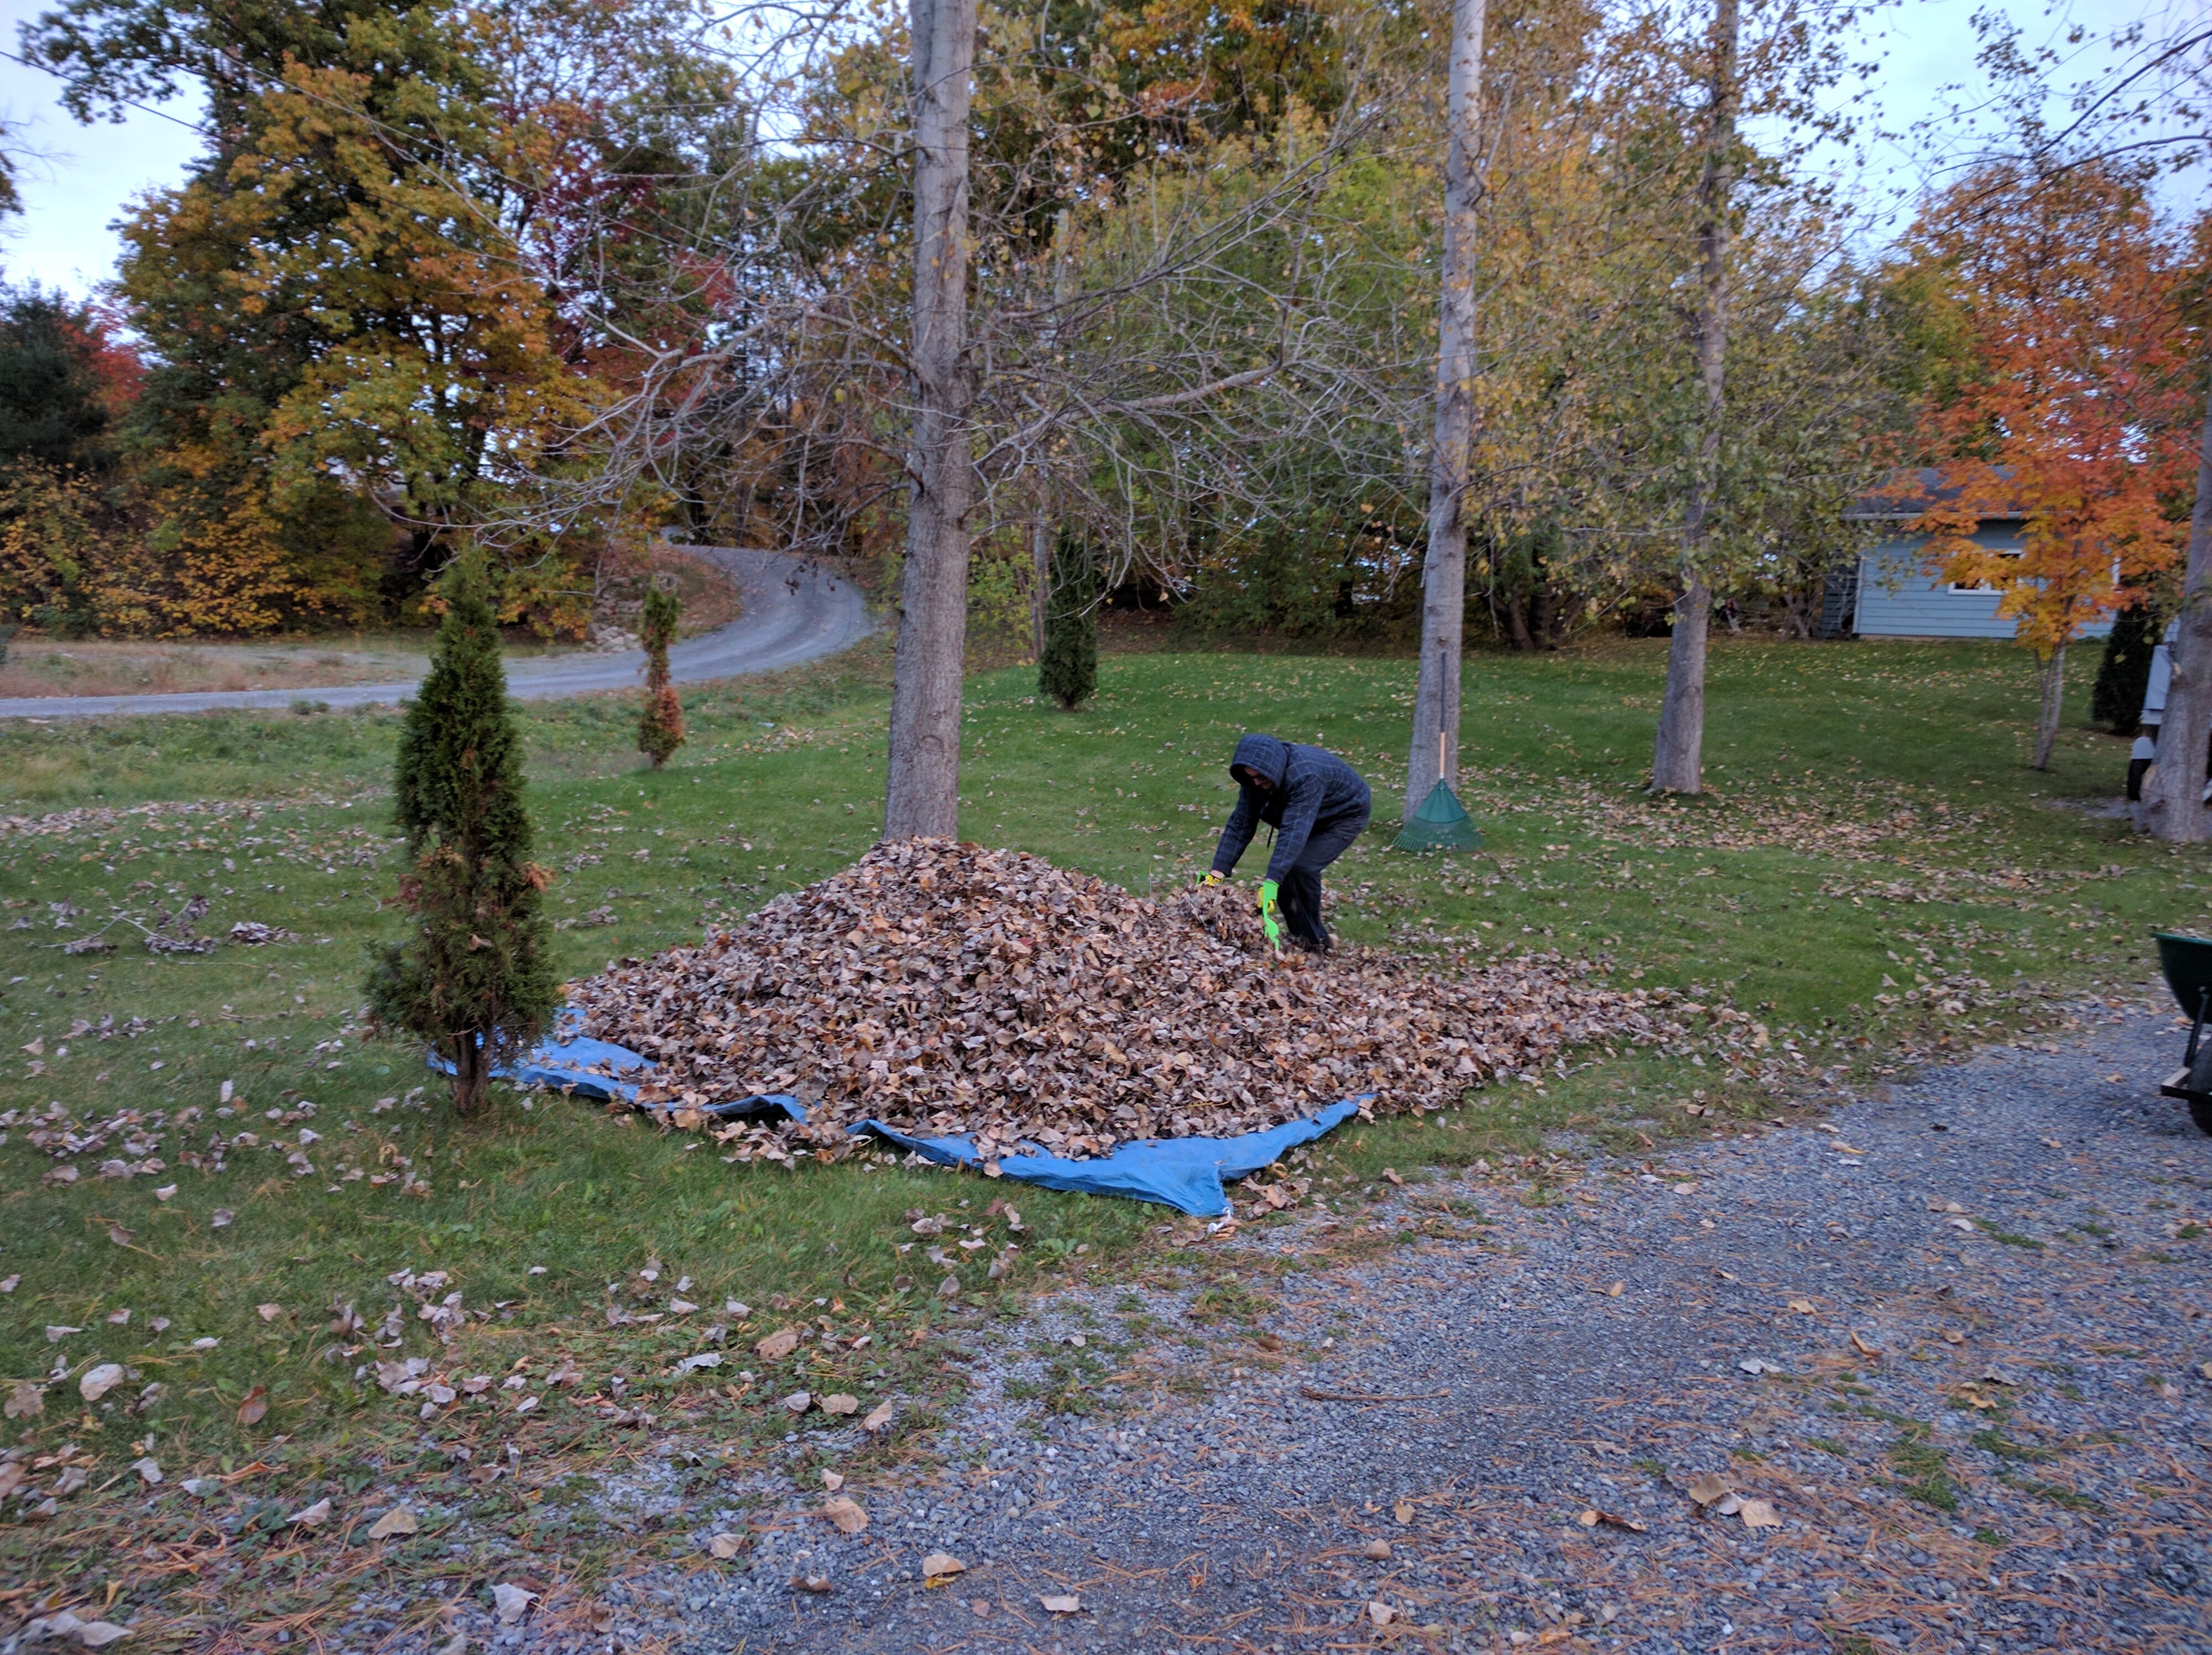 The quick way to move leaves!